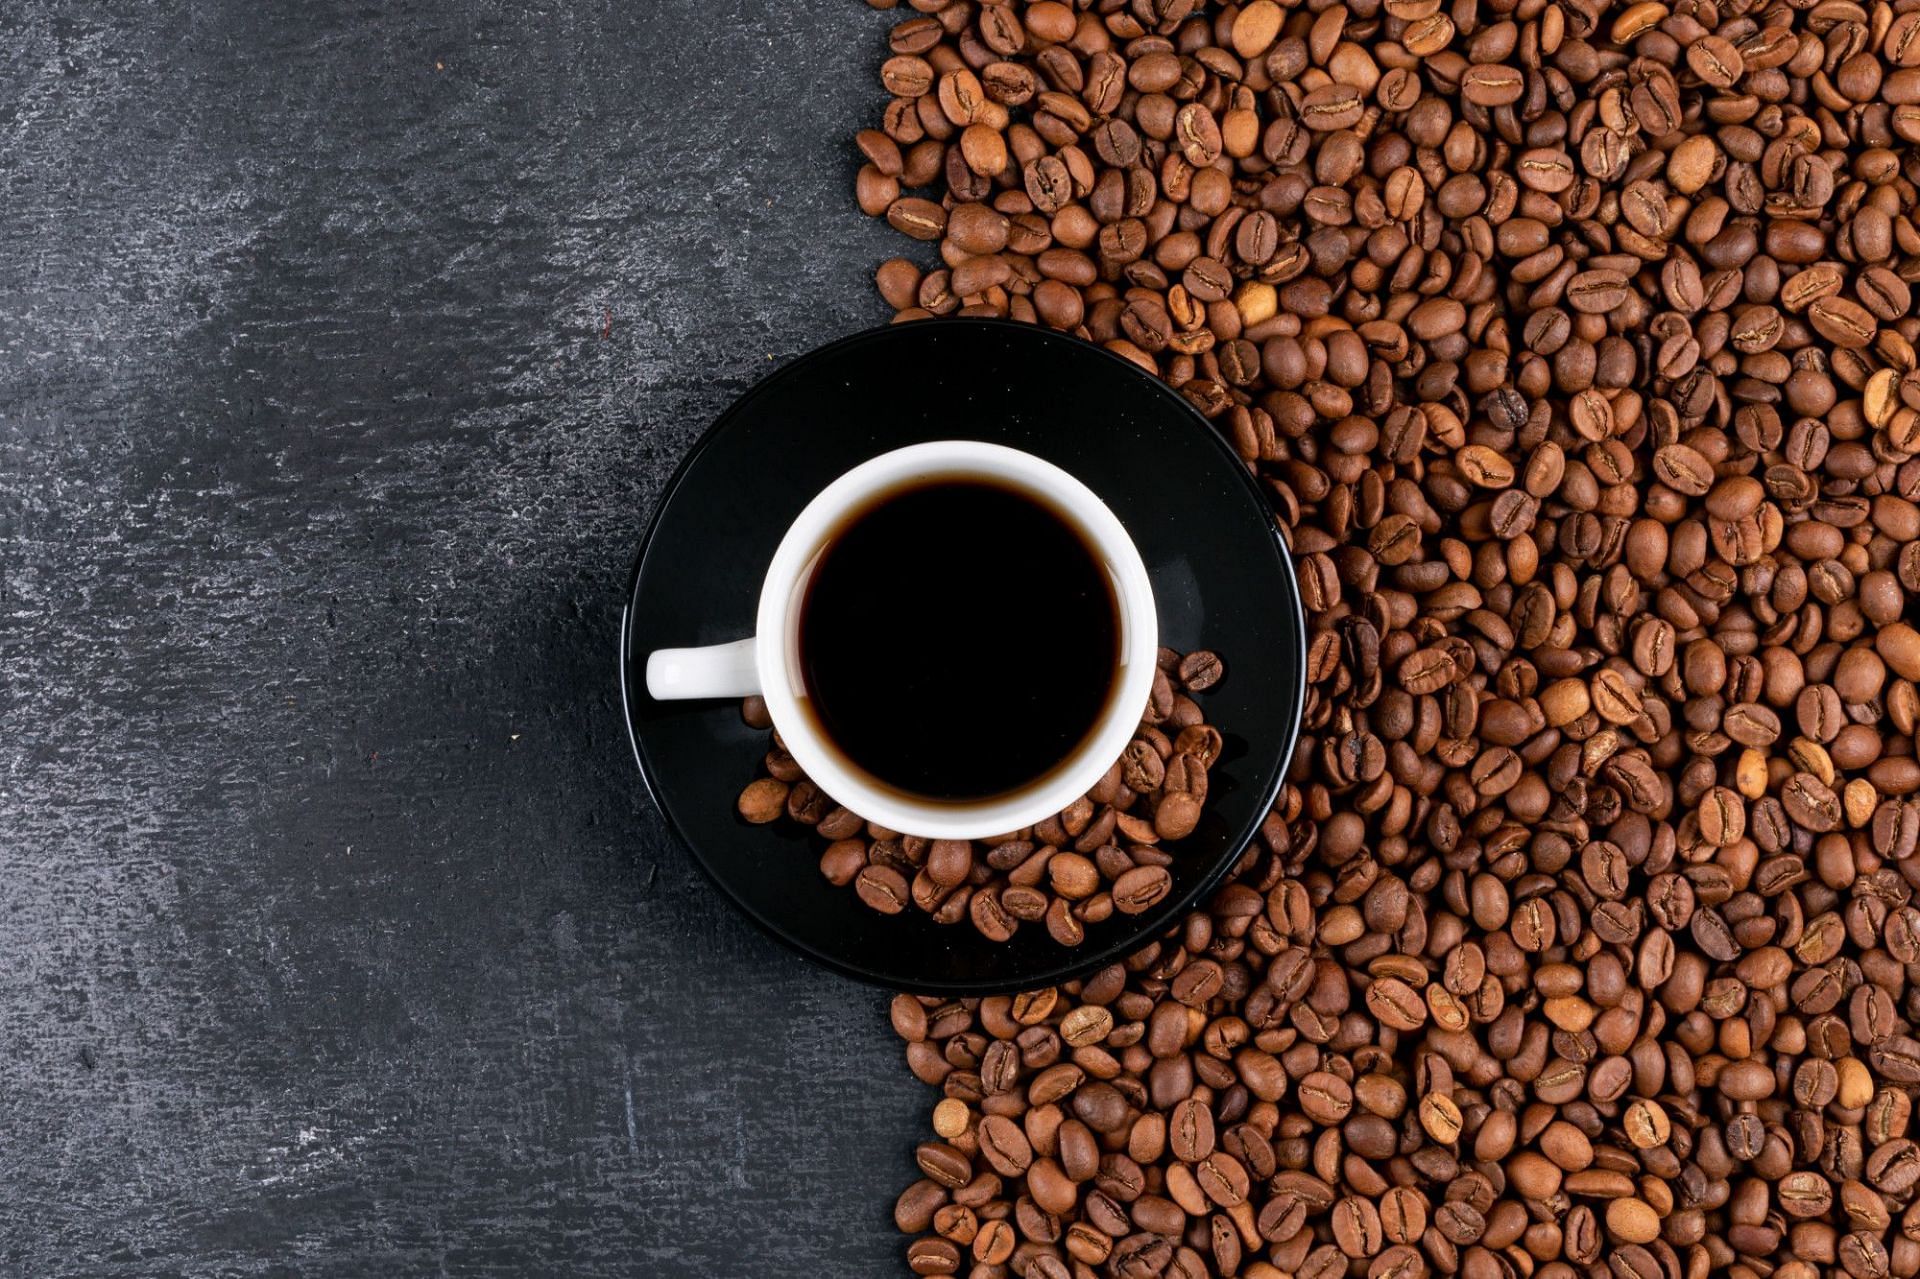 Black coffee without any additives has nearly zero calories (Image by 8photo on freepik)